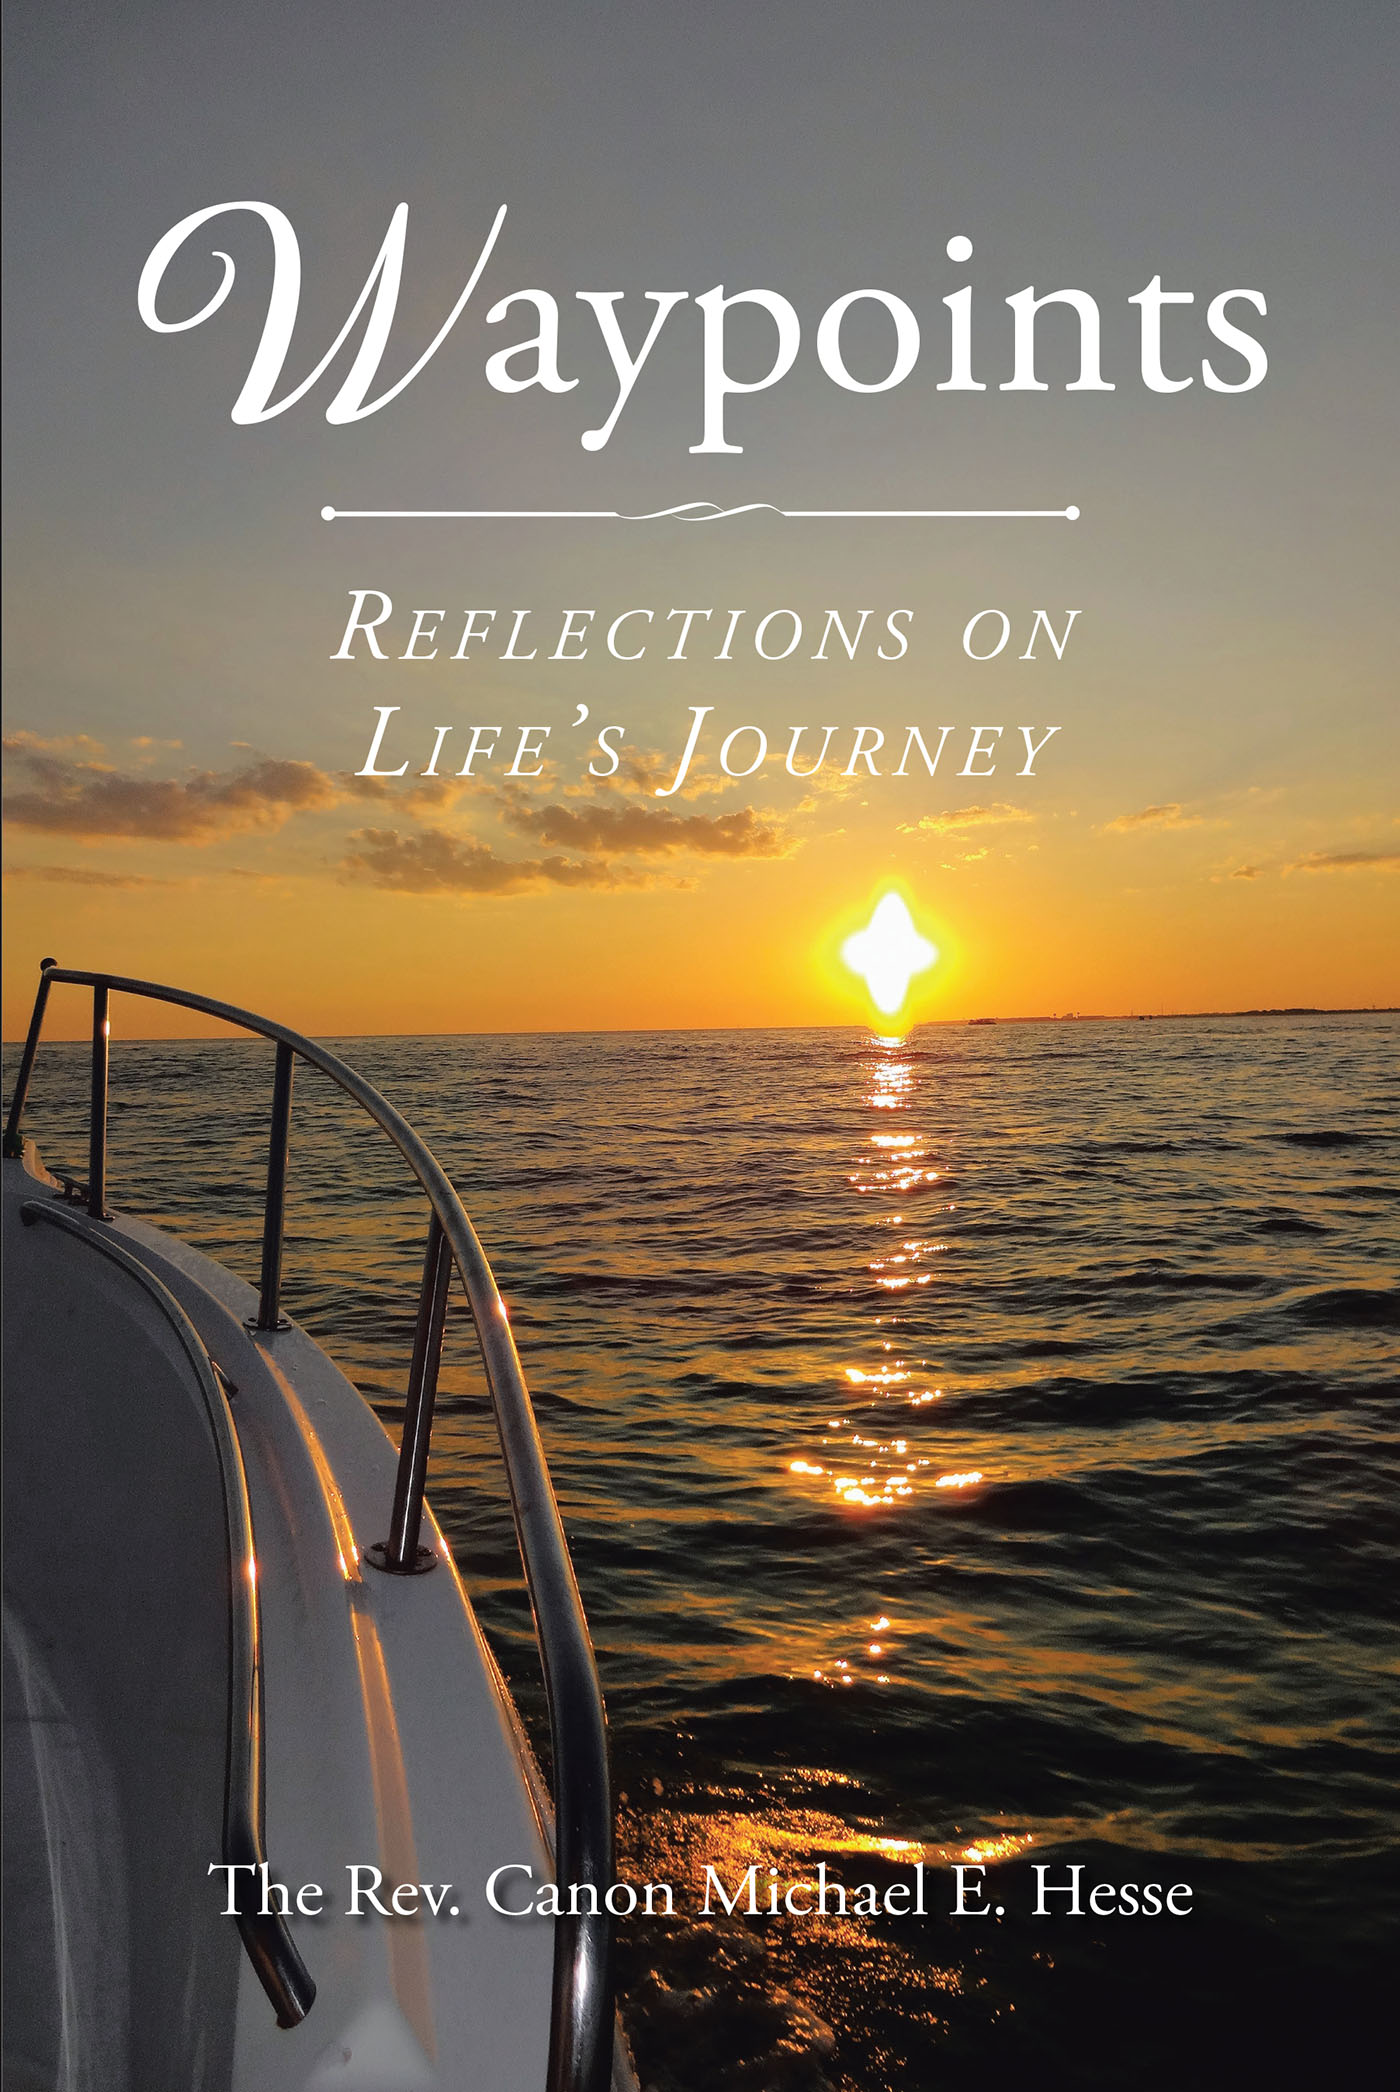 Rev. Canon Michael E. Hesse’s Newly Released "Waypoints: Reflections on Life’s Journey" is an Inspiring Collection of Articles and Reflections